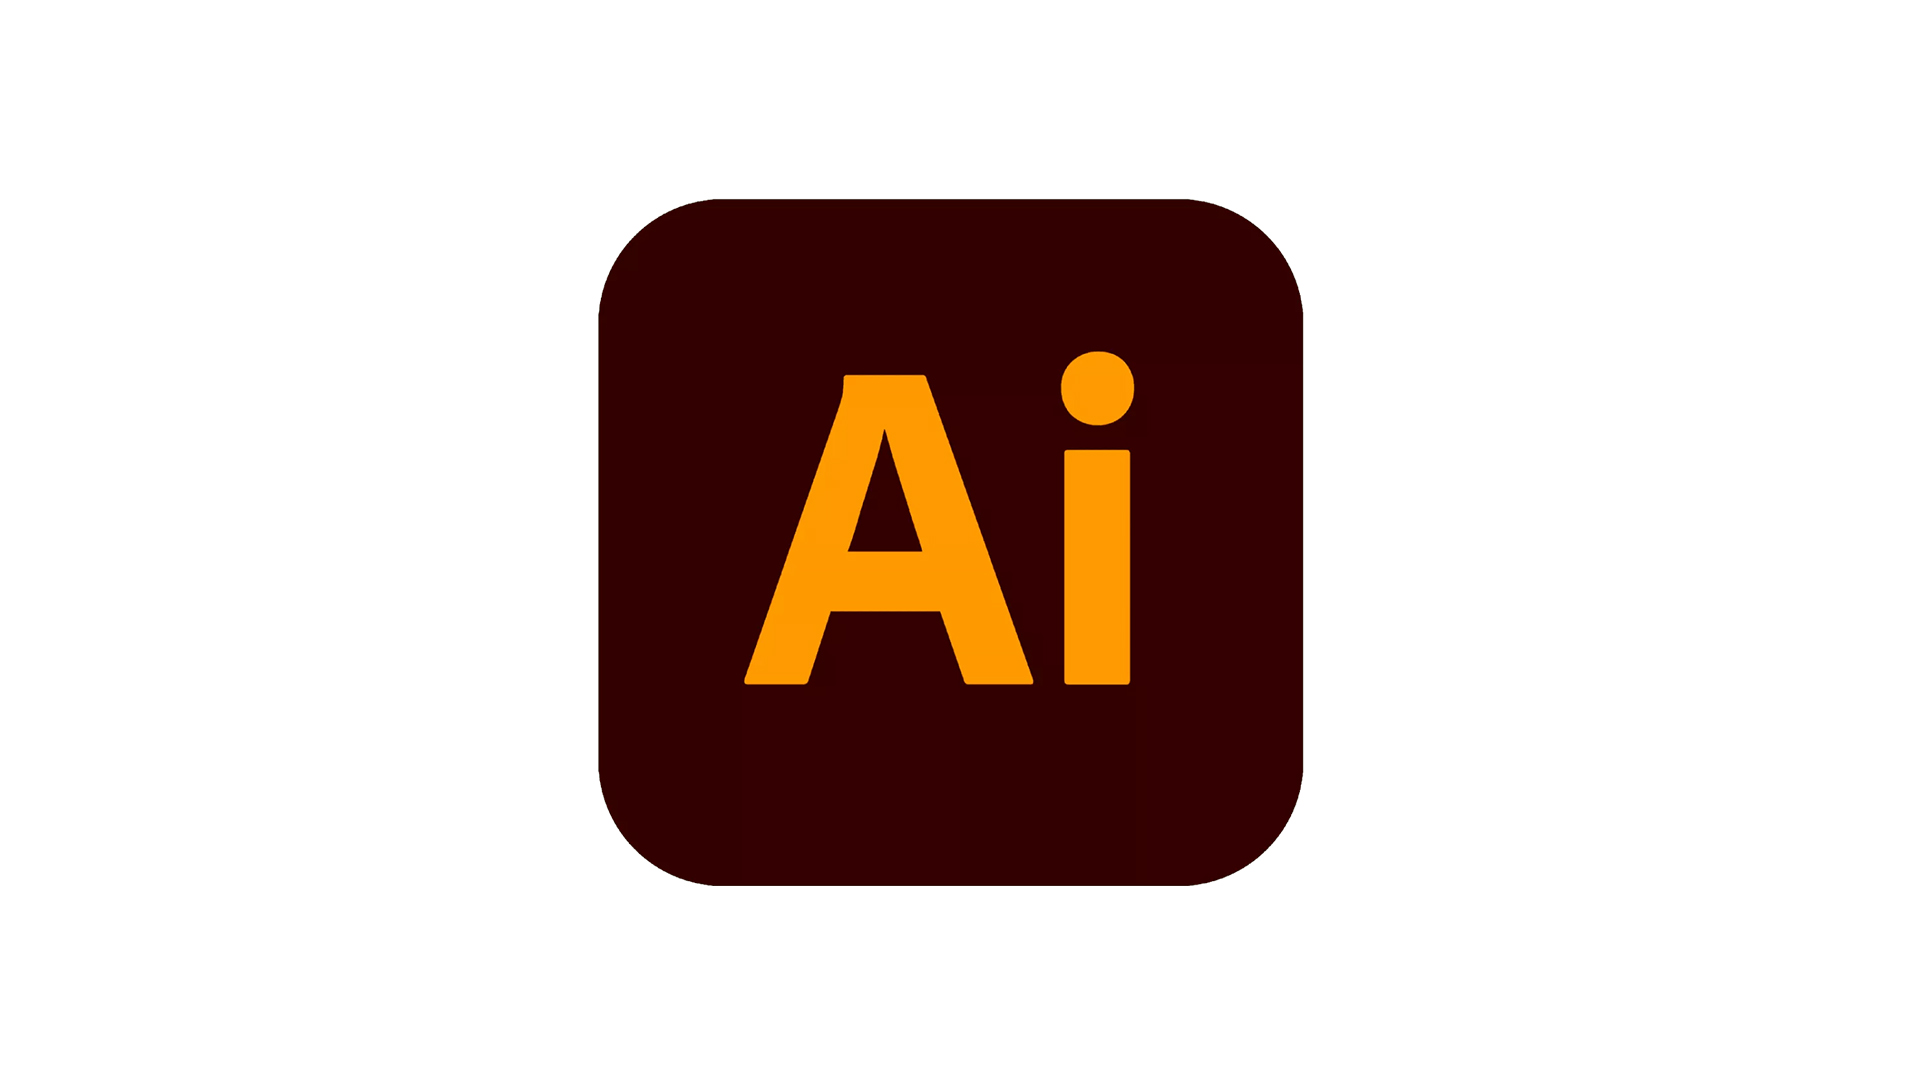 How to download Adobe Illustrator for free and as part of Creative Cloud